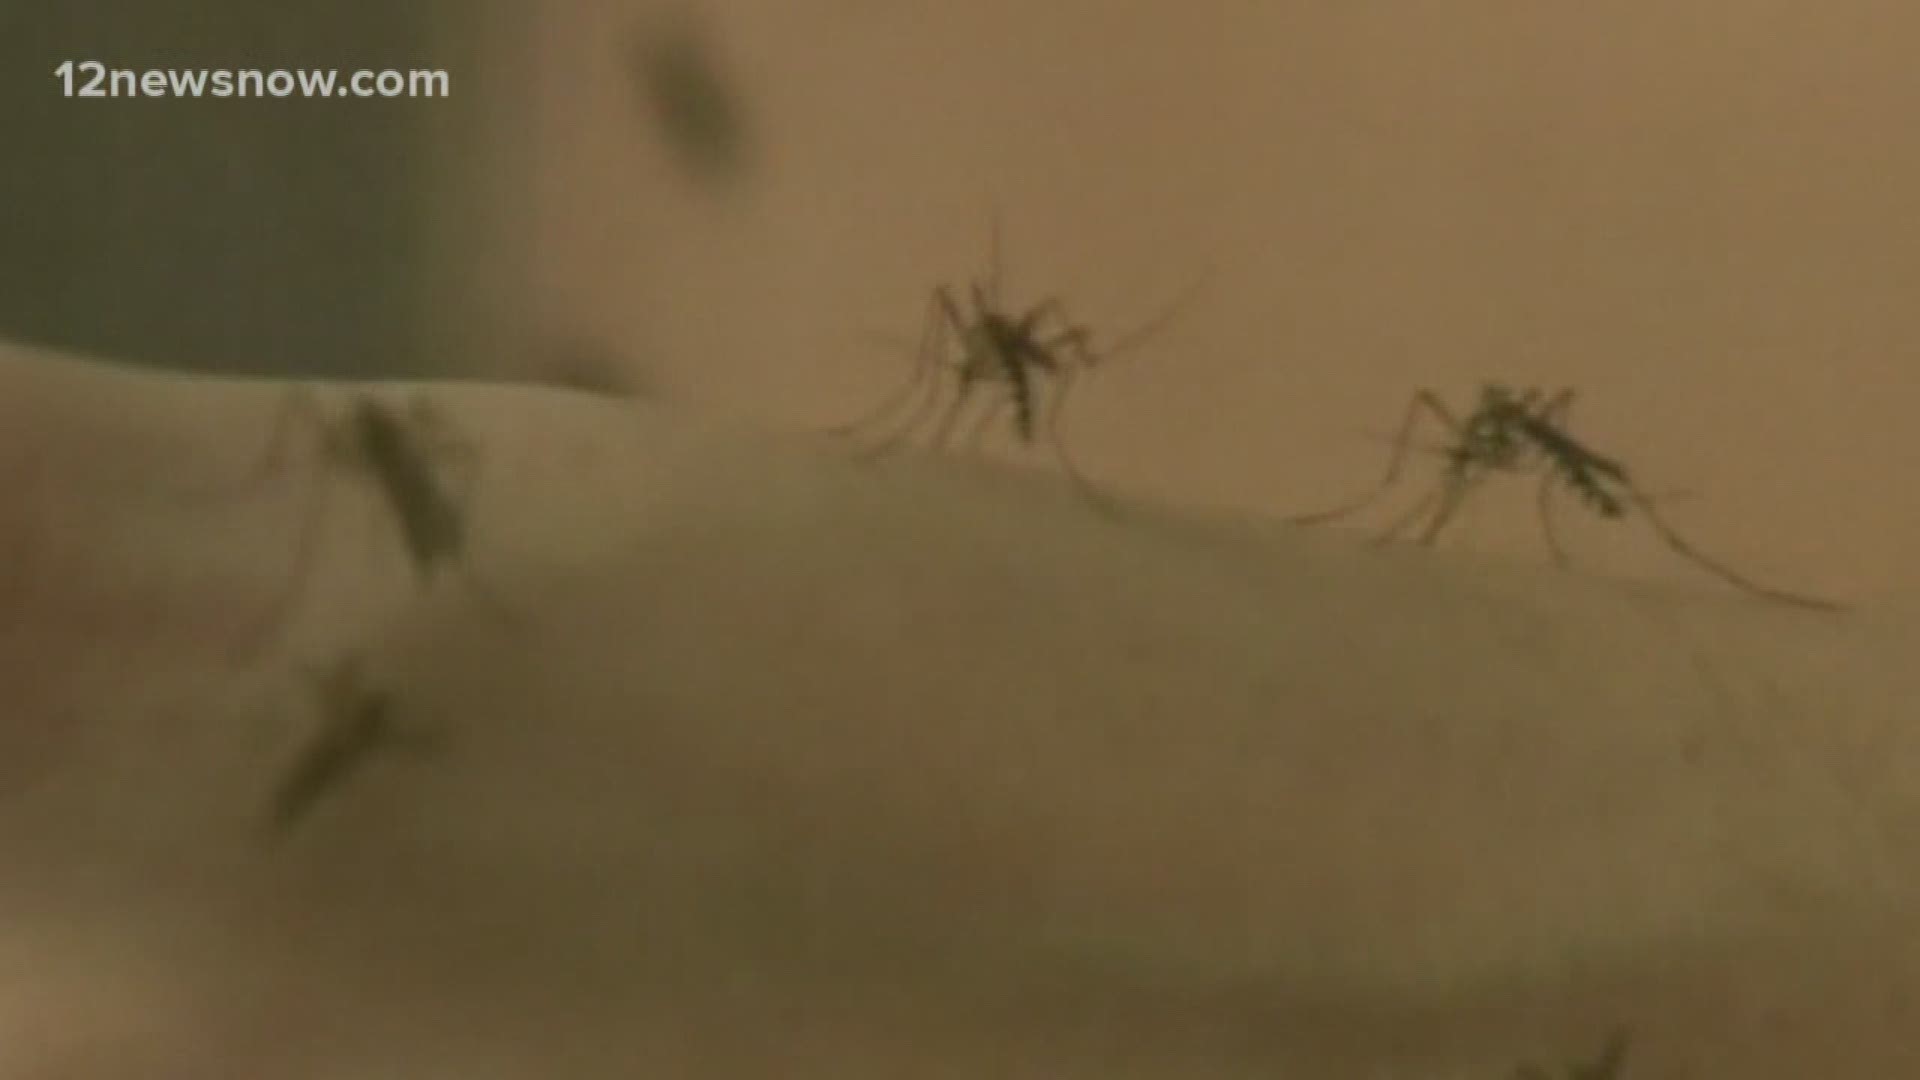 With mosquito samples in Harris and Montgomery counties testing positive for West Nile Virus, health experts are warning people to take precautionary measures against mosquito bites.